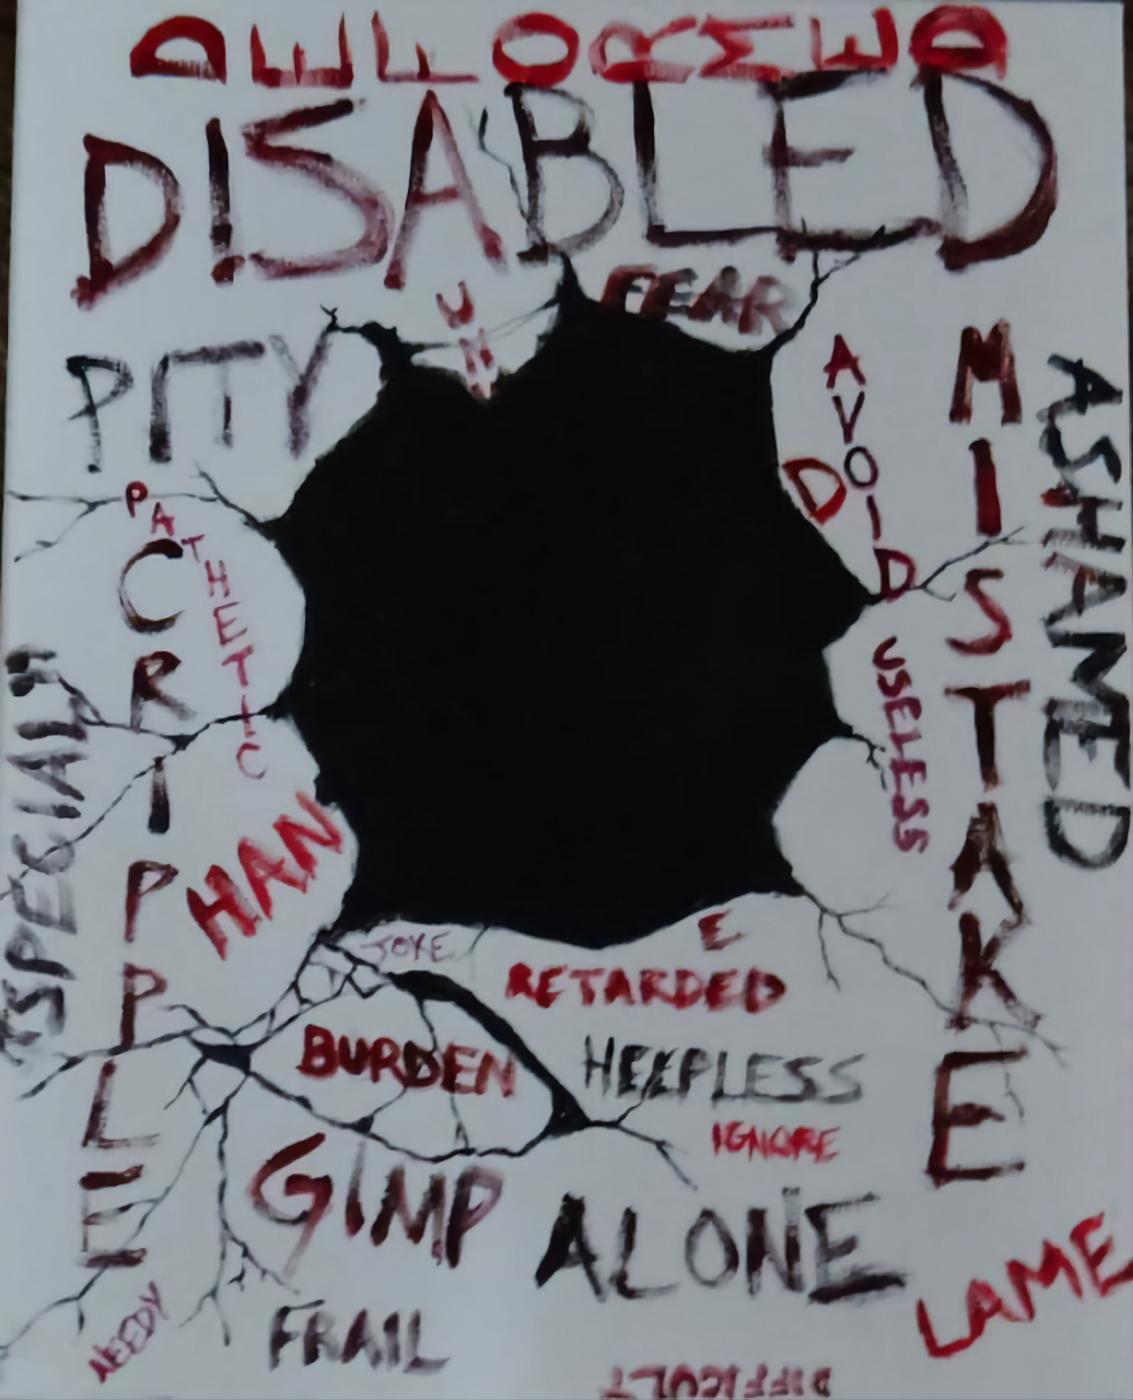 You see a gaping black hole in the center of the canvas as if the wall is being punched and broken. The many labels associated with disabilities are written in black and red of various sizes, some written upside down, sideways and across the canvas. The shattered wall of text crumbles in various spots around the hole.